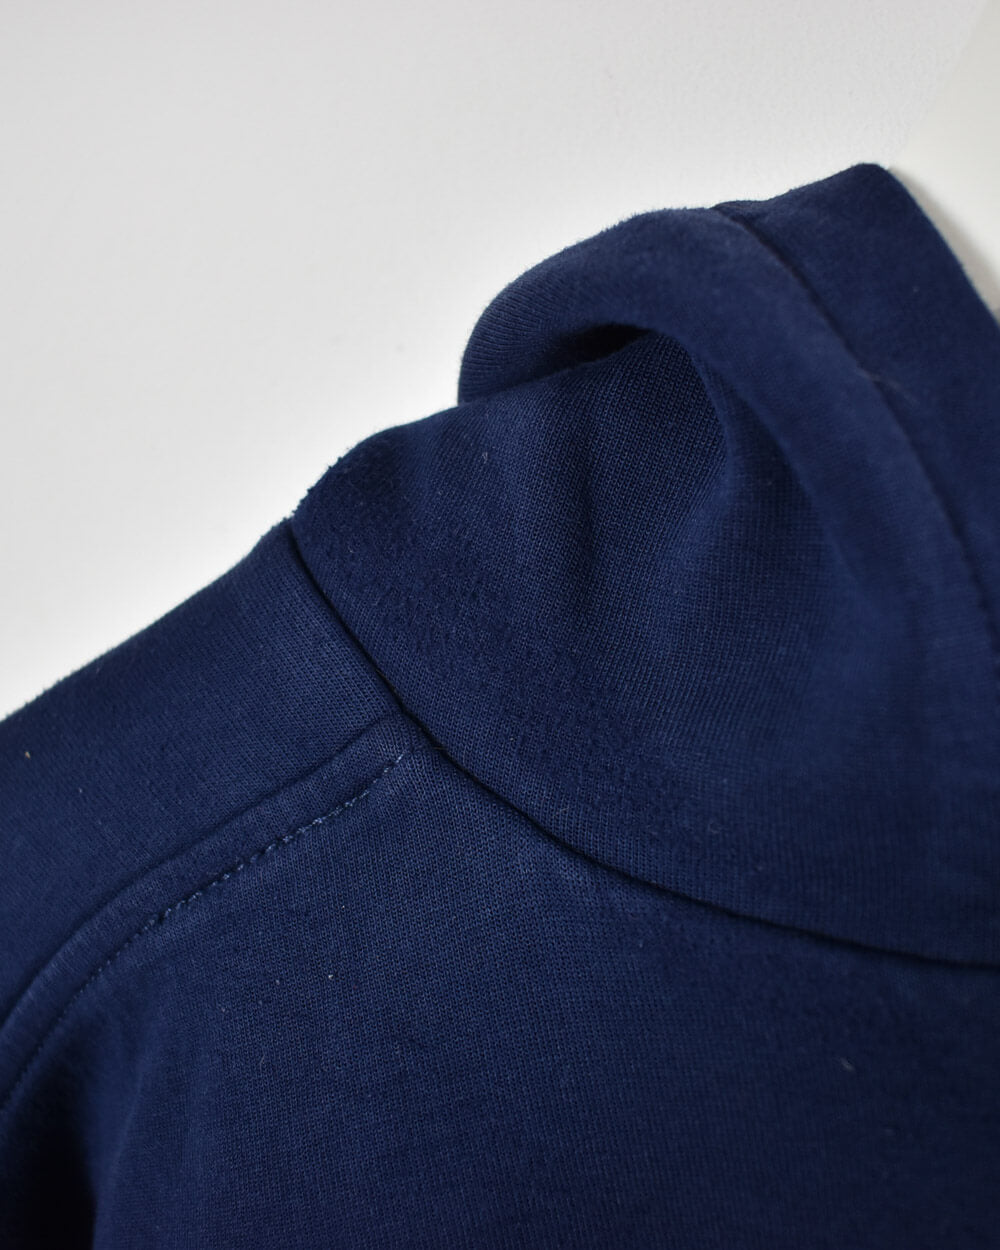 Ralph Lauren Hoodie - X-Small - Domno Vintage 90s, 80s, 00s Retro and Vintage Clothing 